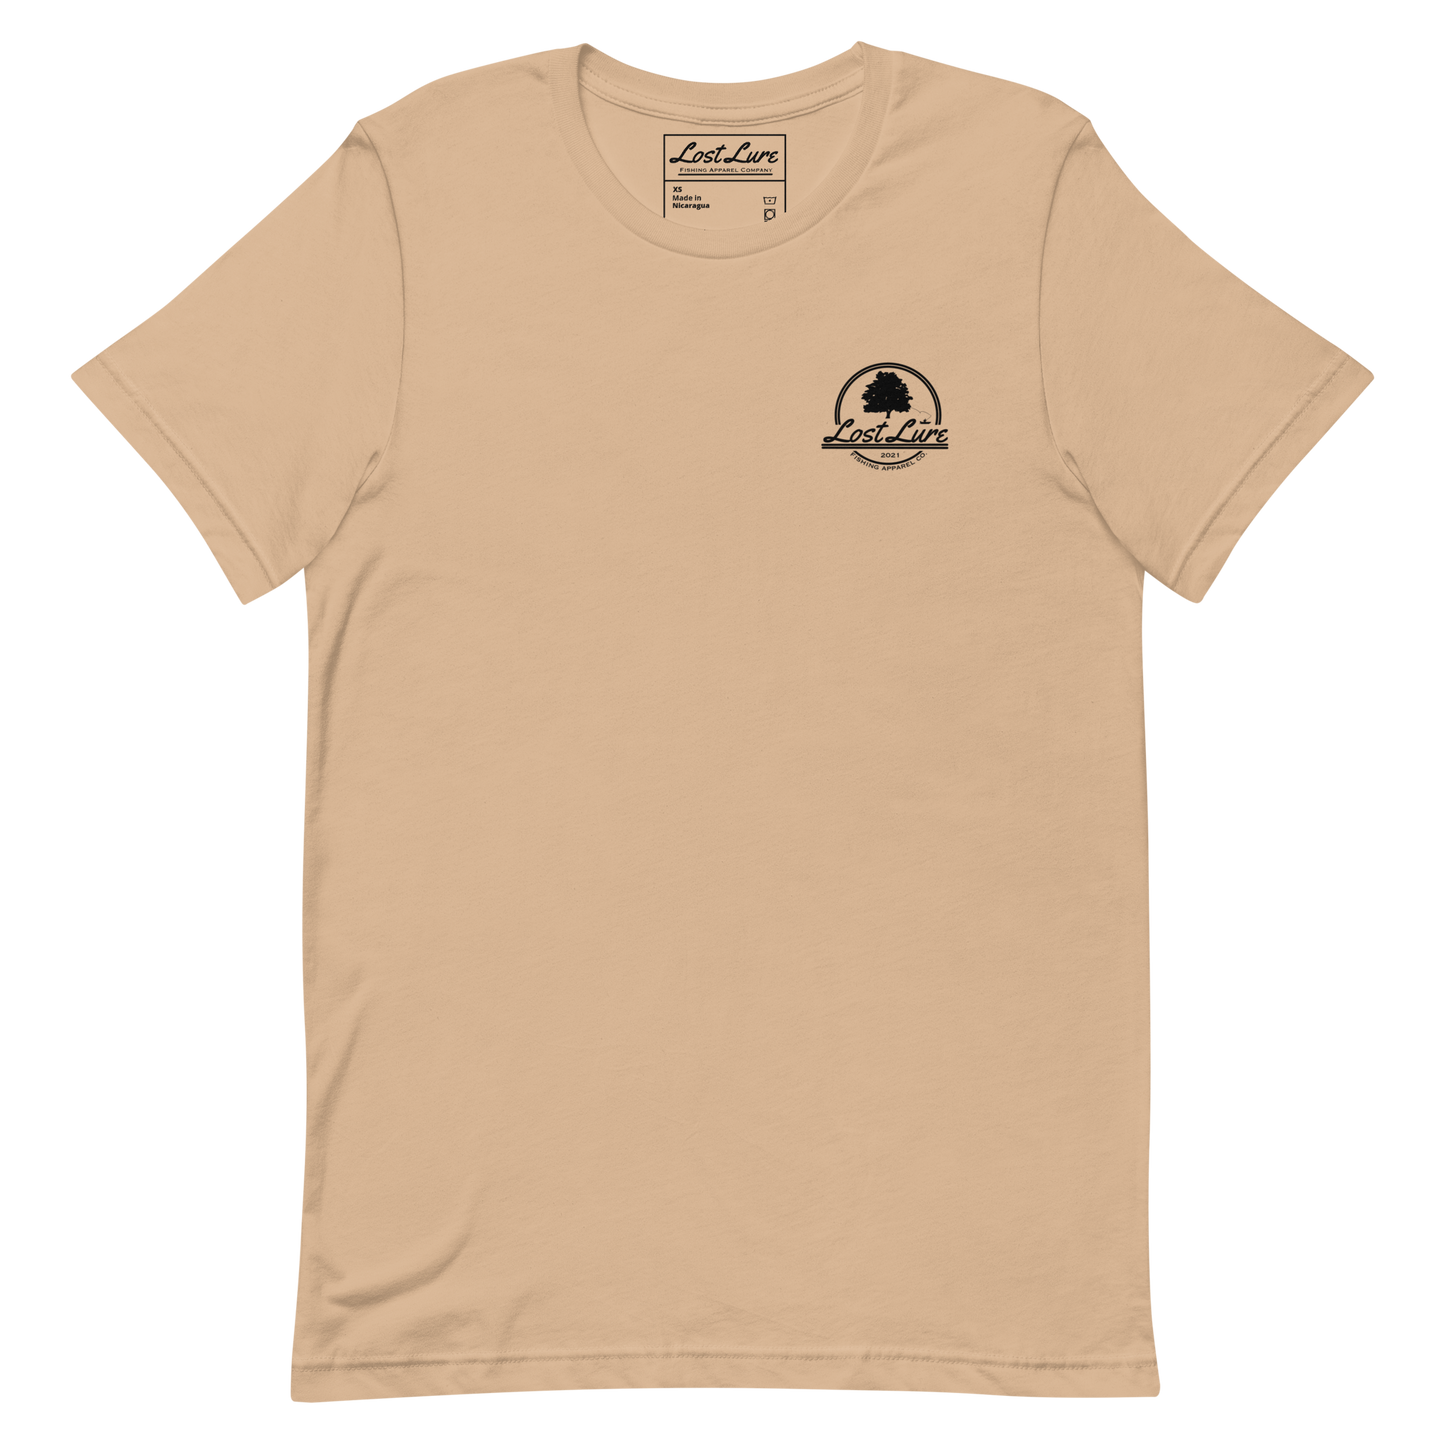 Cutthroat Trout fishing shirt. It’s an American traditional style design with a cutthroat trout and a dagger. The shirt reads Cutthroat trout, est. 2021, lost lure fishing apparel company. The front of the shirt has the lost lure logo. Light brown fishing shirt, front side 